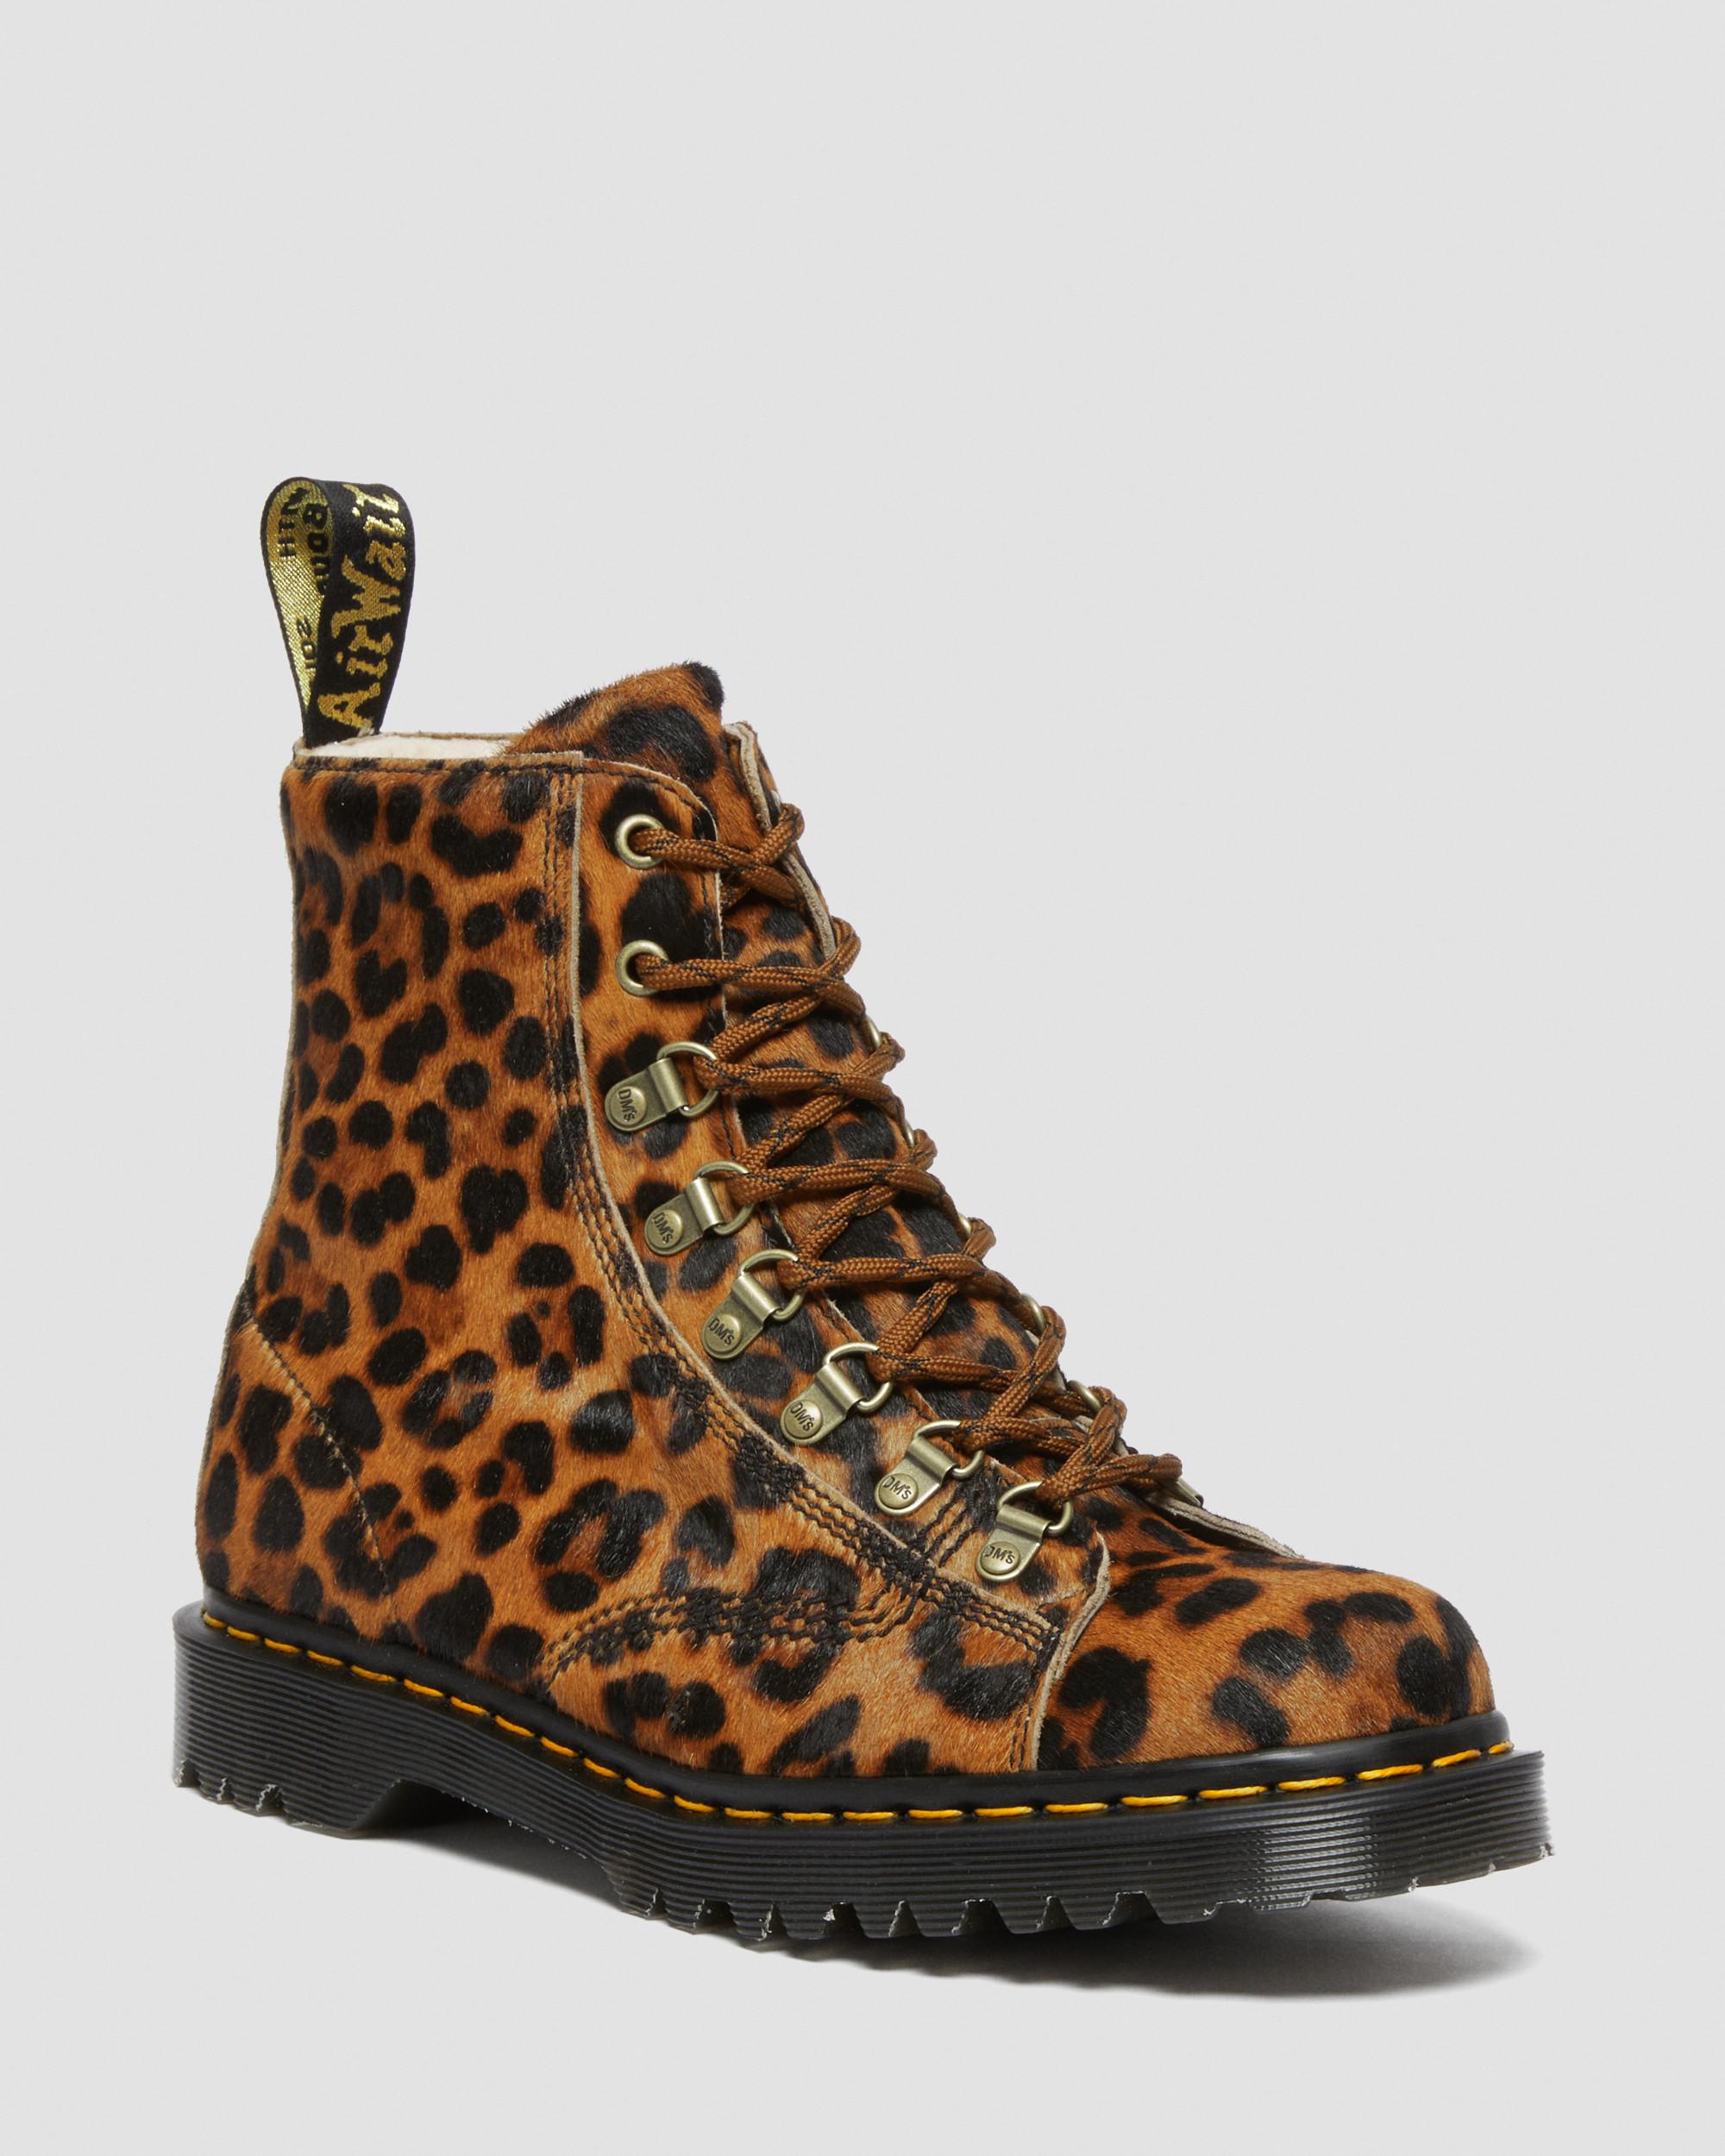 Barton Made in England Leopard Boots | Dr. Martens